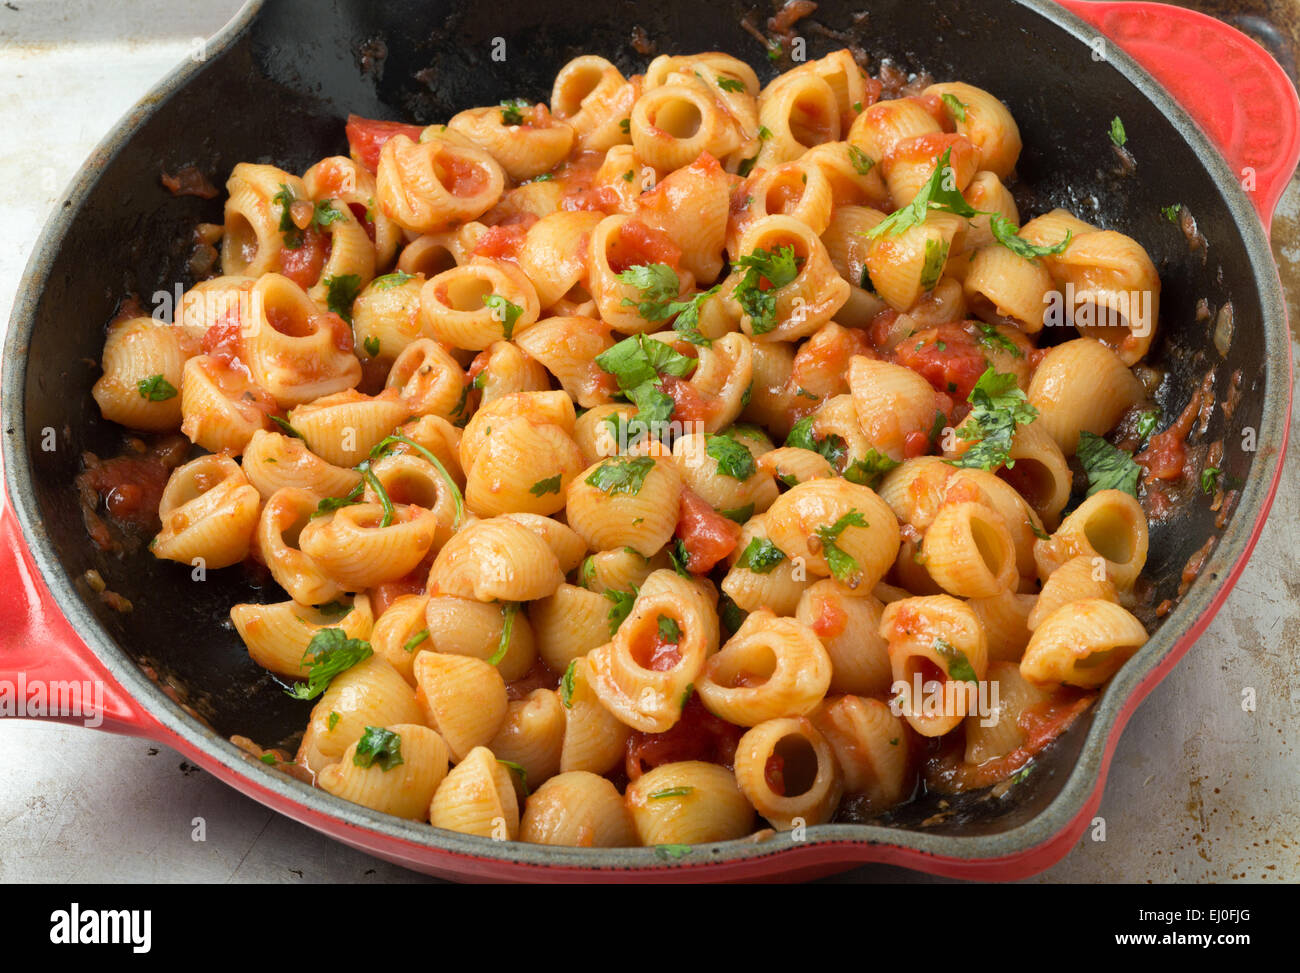 Gomiti elbow pasta shells in arrabbiata tomato, garlic and chili sauce, garnished with chopped parsley, cooking in a frying pan. Stock Photo